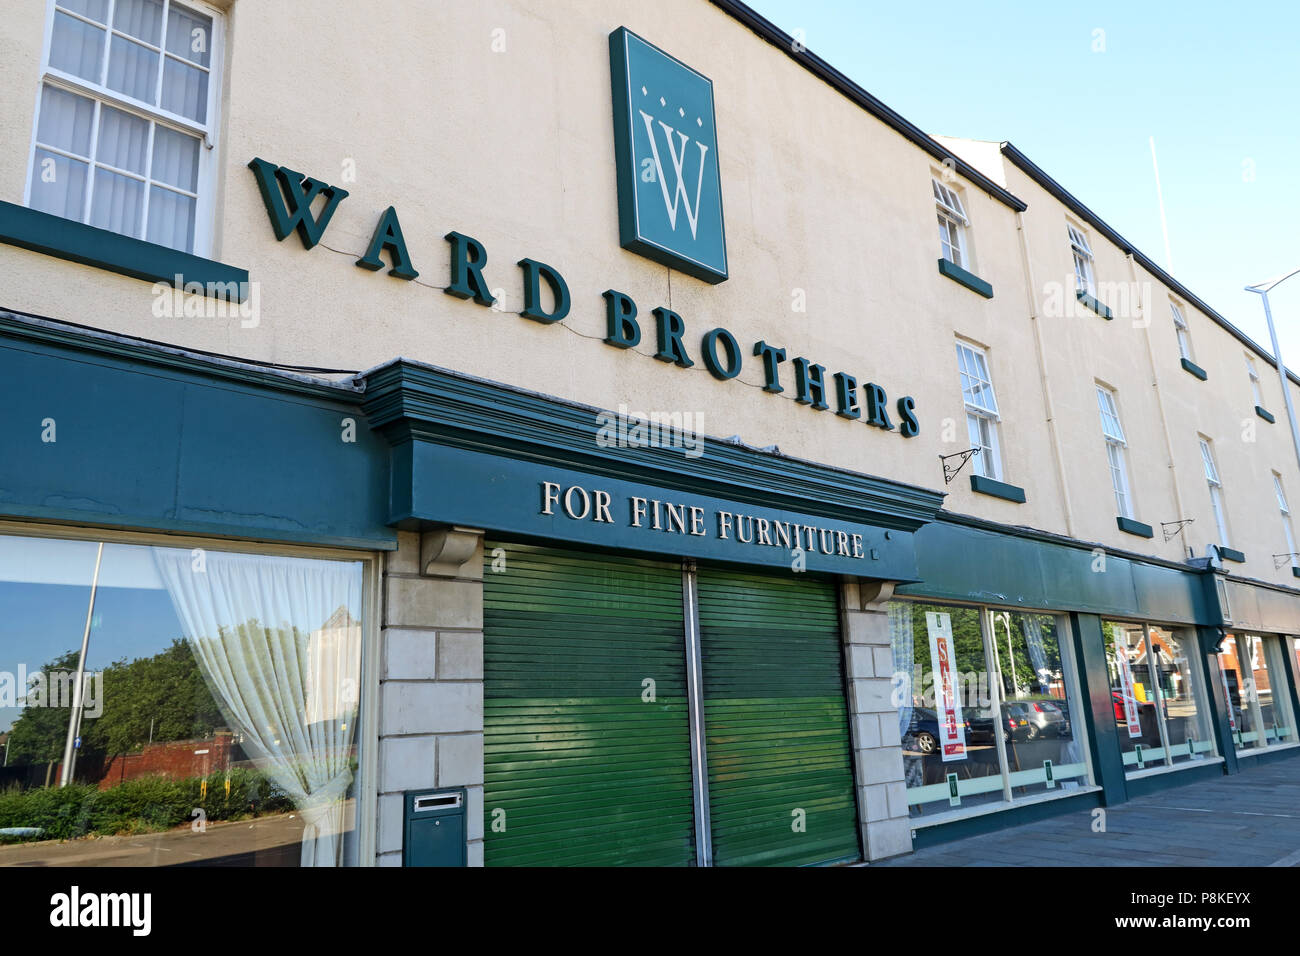 Ward Brothers Furniture Store, Doncaster, 29 - 40 Waterdale, Doncaster, Yorkshire, England, UK,  DN1 3EY Stock Photo